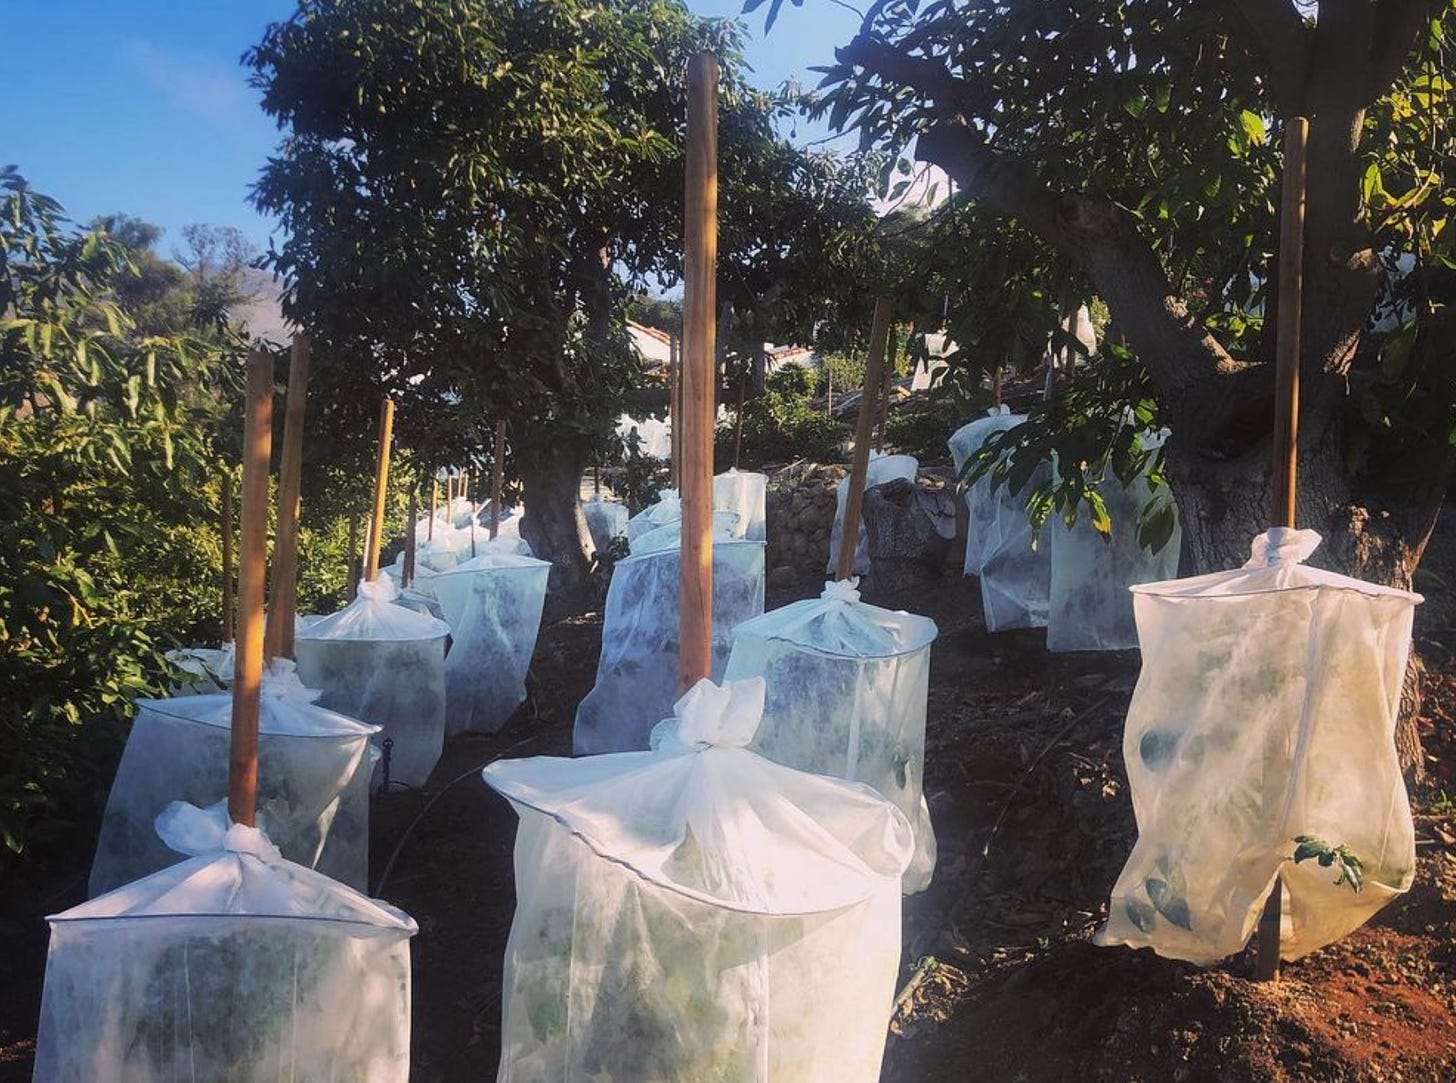 Three side by side rows of coffee plants wrapped in white mesh sacks to prevent damage from cool temperatures.